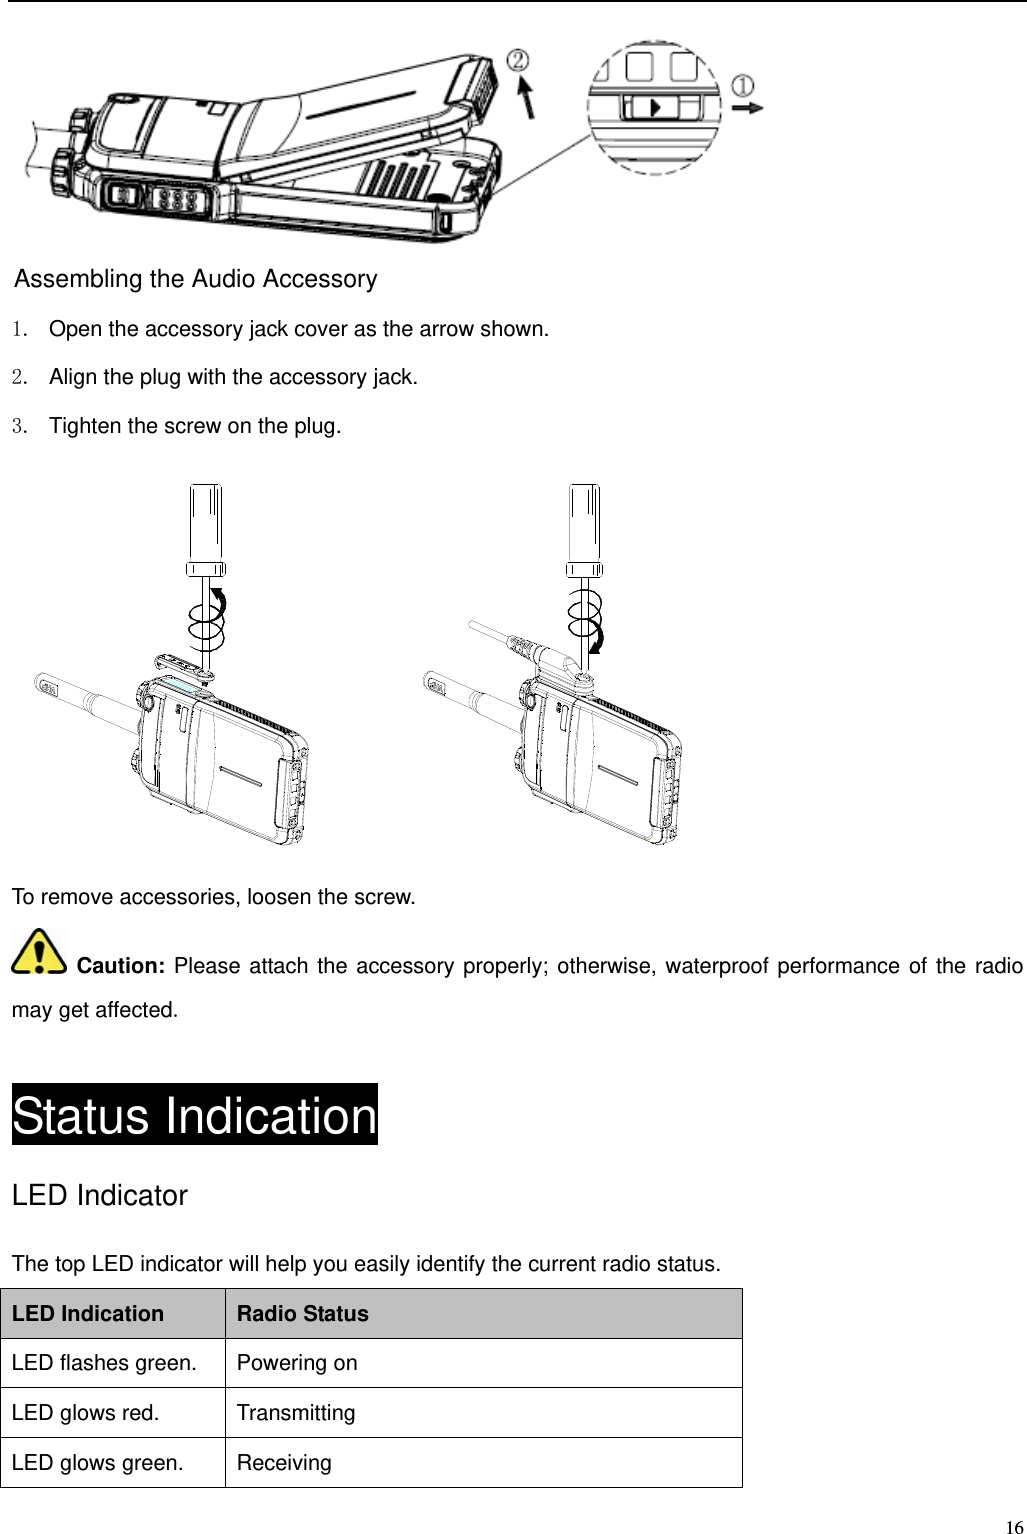                                                                                                              16  Assembling the Audio Accessory 1.  Open the accessory jack cover as the arrow shown.   2.  Align the plug with the accessory jack.   3.  Tighten the screw on the plug.        To remove accessories, loosen the screw.    Caution: Please attach the accessory properly; otherwise, waterproof performance of the radio may get affected.   Status Indication LED Indicator The top LED indicator will help you easily identify the current radio status.   LED Indication Radio Status LED flashes green. Powering on LED glows red. Transmitting LED glows green. Receiving 